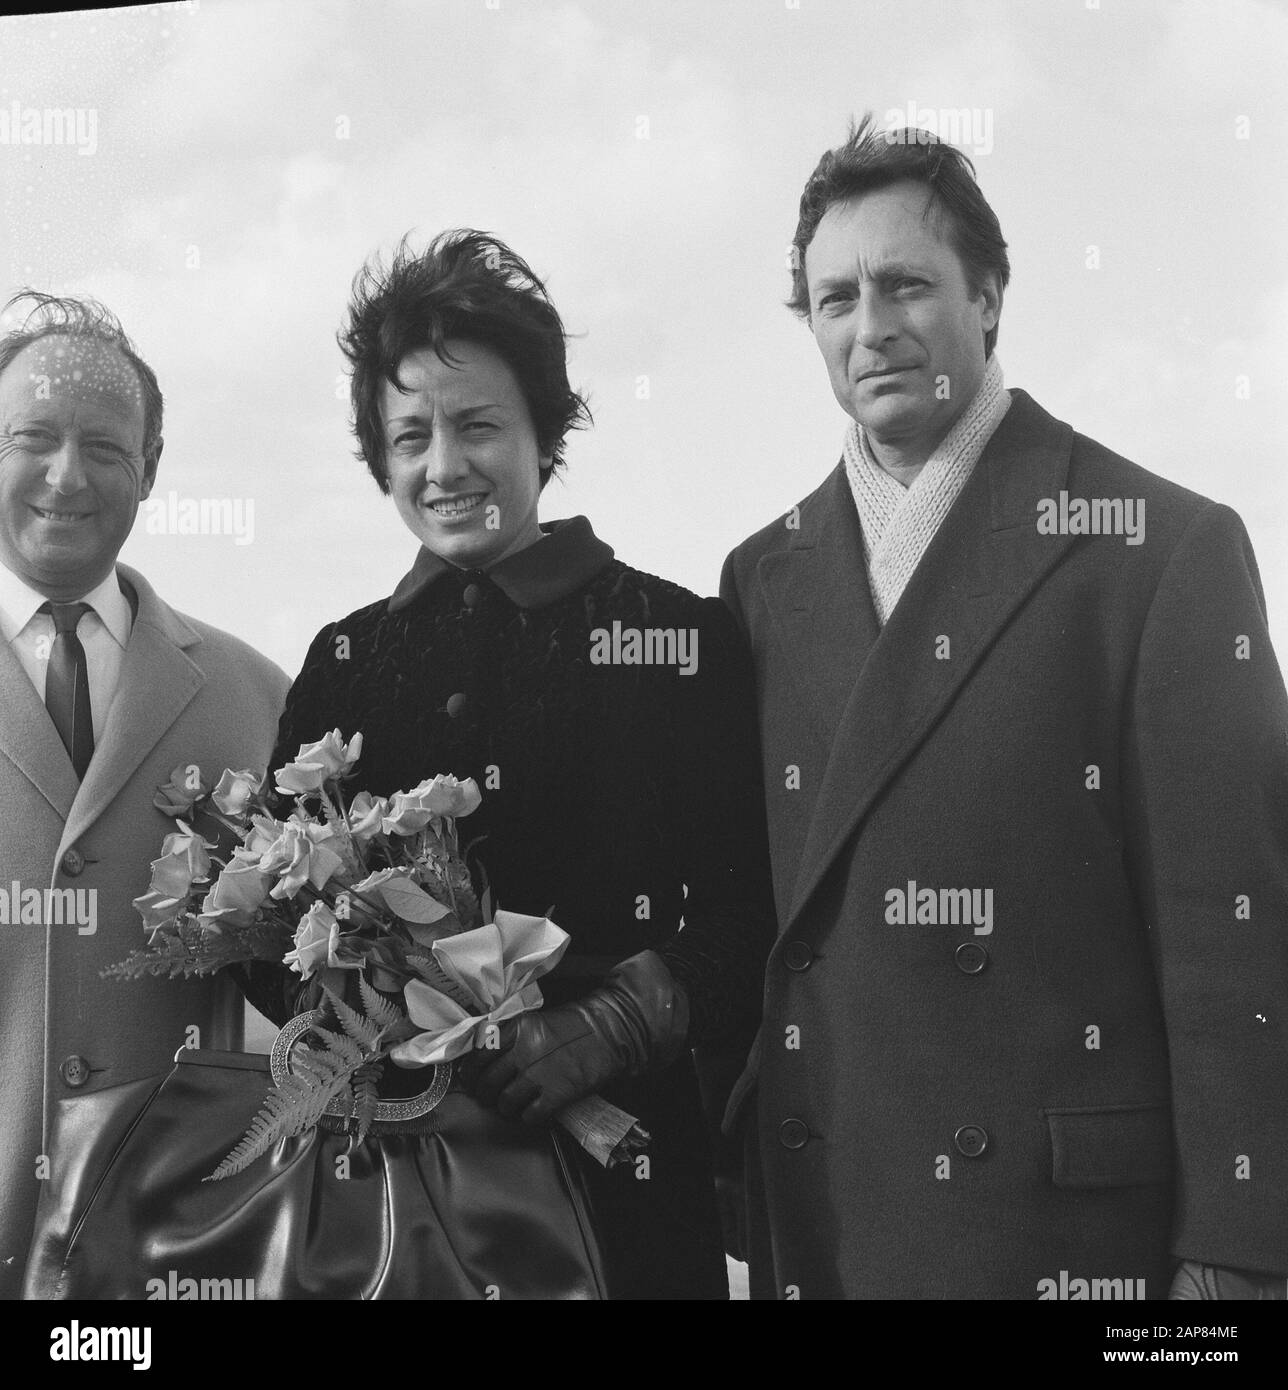 Arrival of Carlo Maria Giulini, guest conductor of the Philharmonia Orchestra in London, and his wife at Schiphol in connection with the Edison ceremony Description: arrival and departure, conductors, women, flowers, Giulini, Carlo Maria, Girolami, Marcella the Date: 29 October 1965 Location: Noord-Holland, Schiphol Keywords: arrival and departure, flowers, conductors, women Personal name: Girolami, Marcella de, Giulini, Carlo Maria Stock Photo